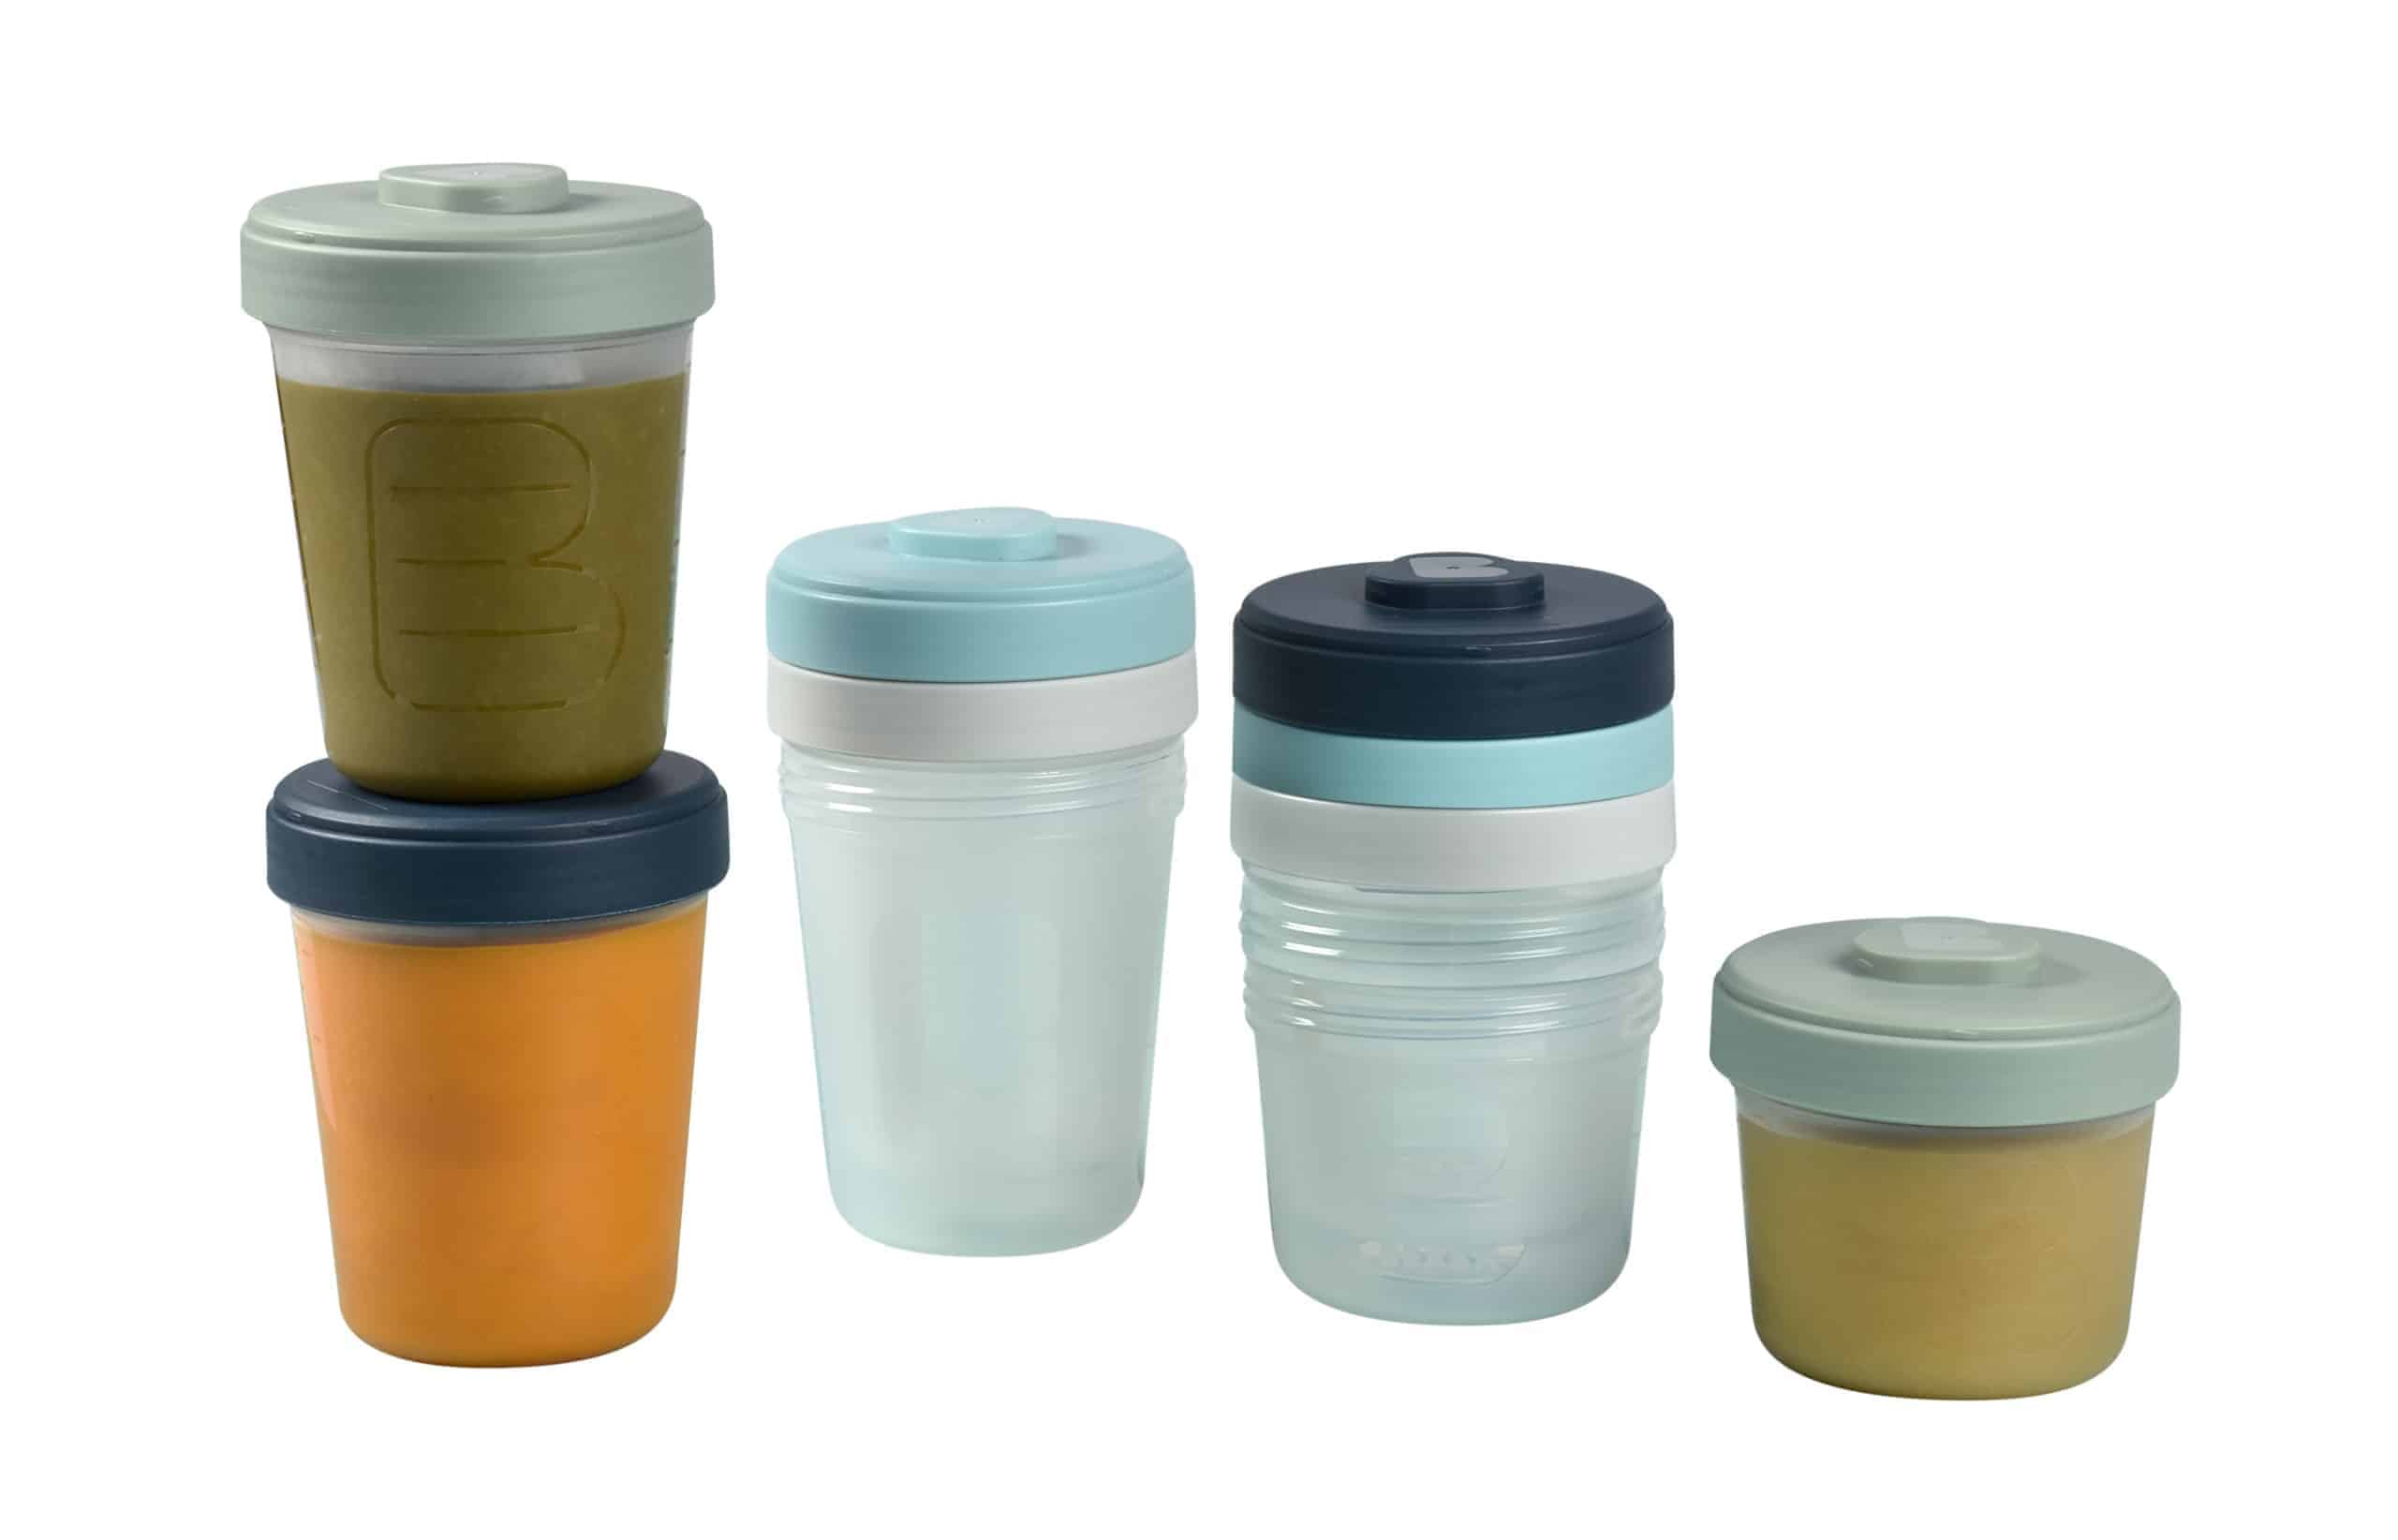 Baby Food Storage Clip Containers Set of 8 Large